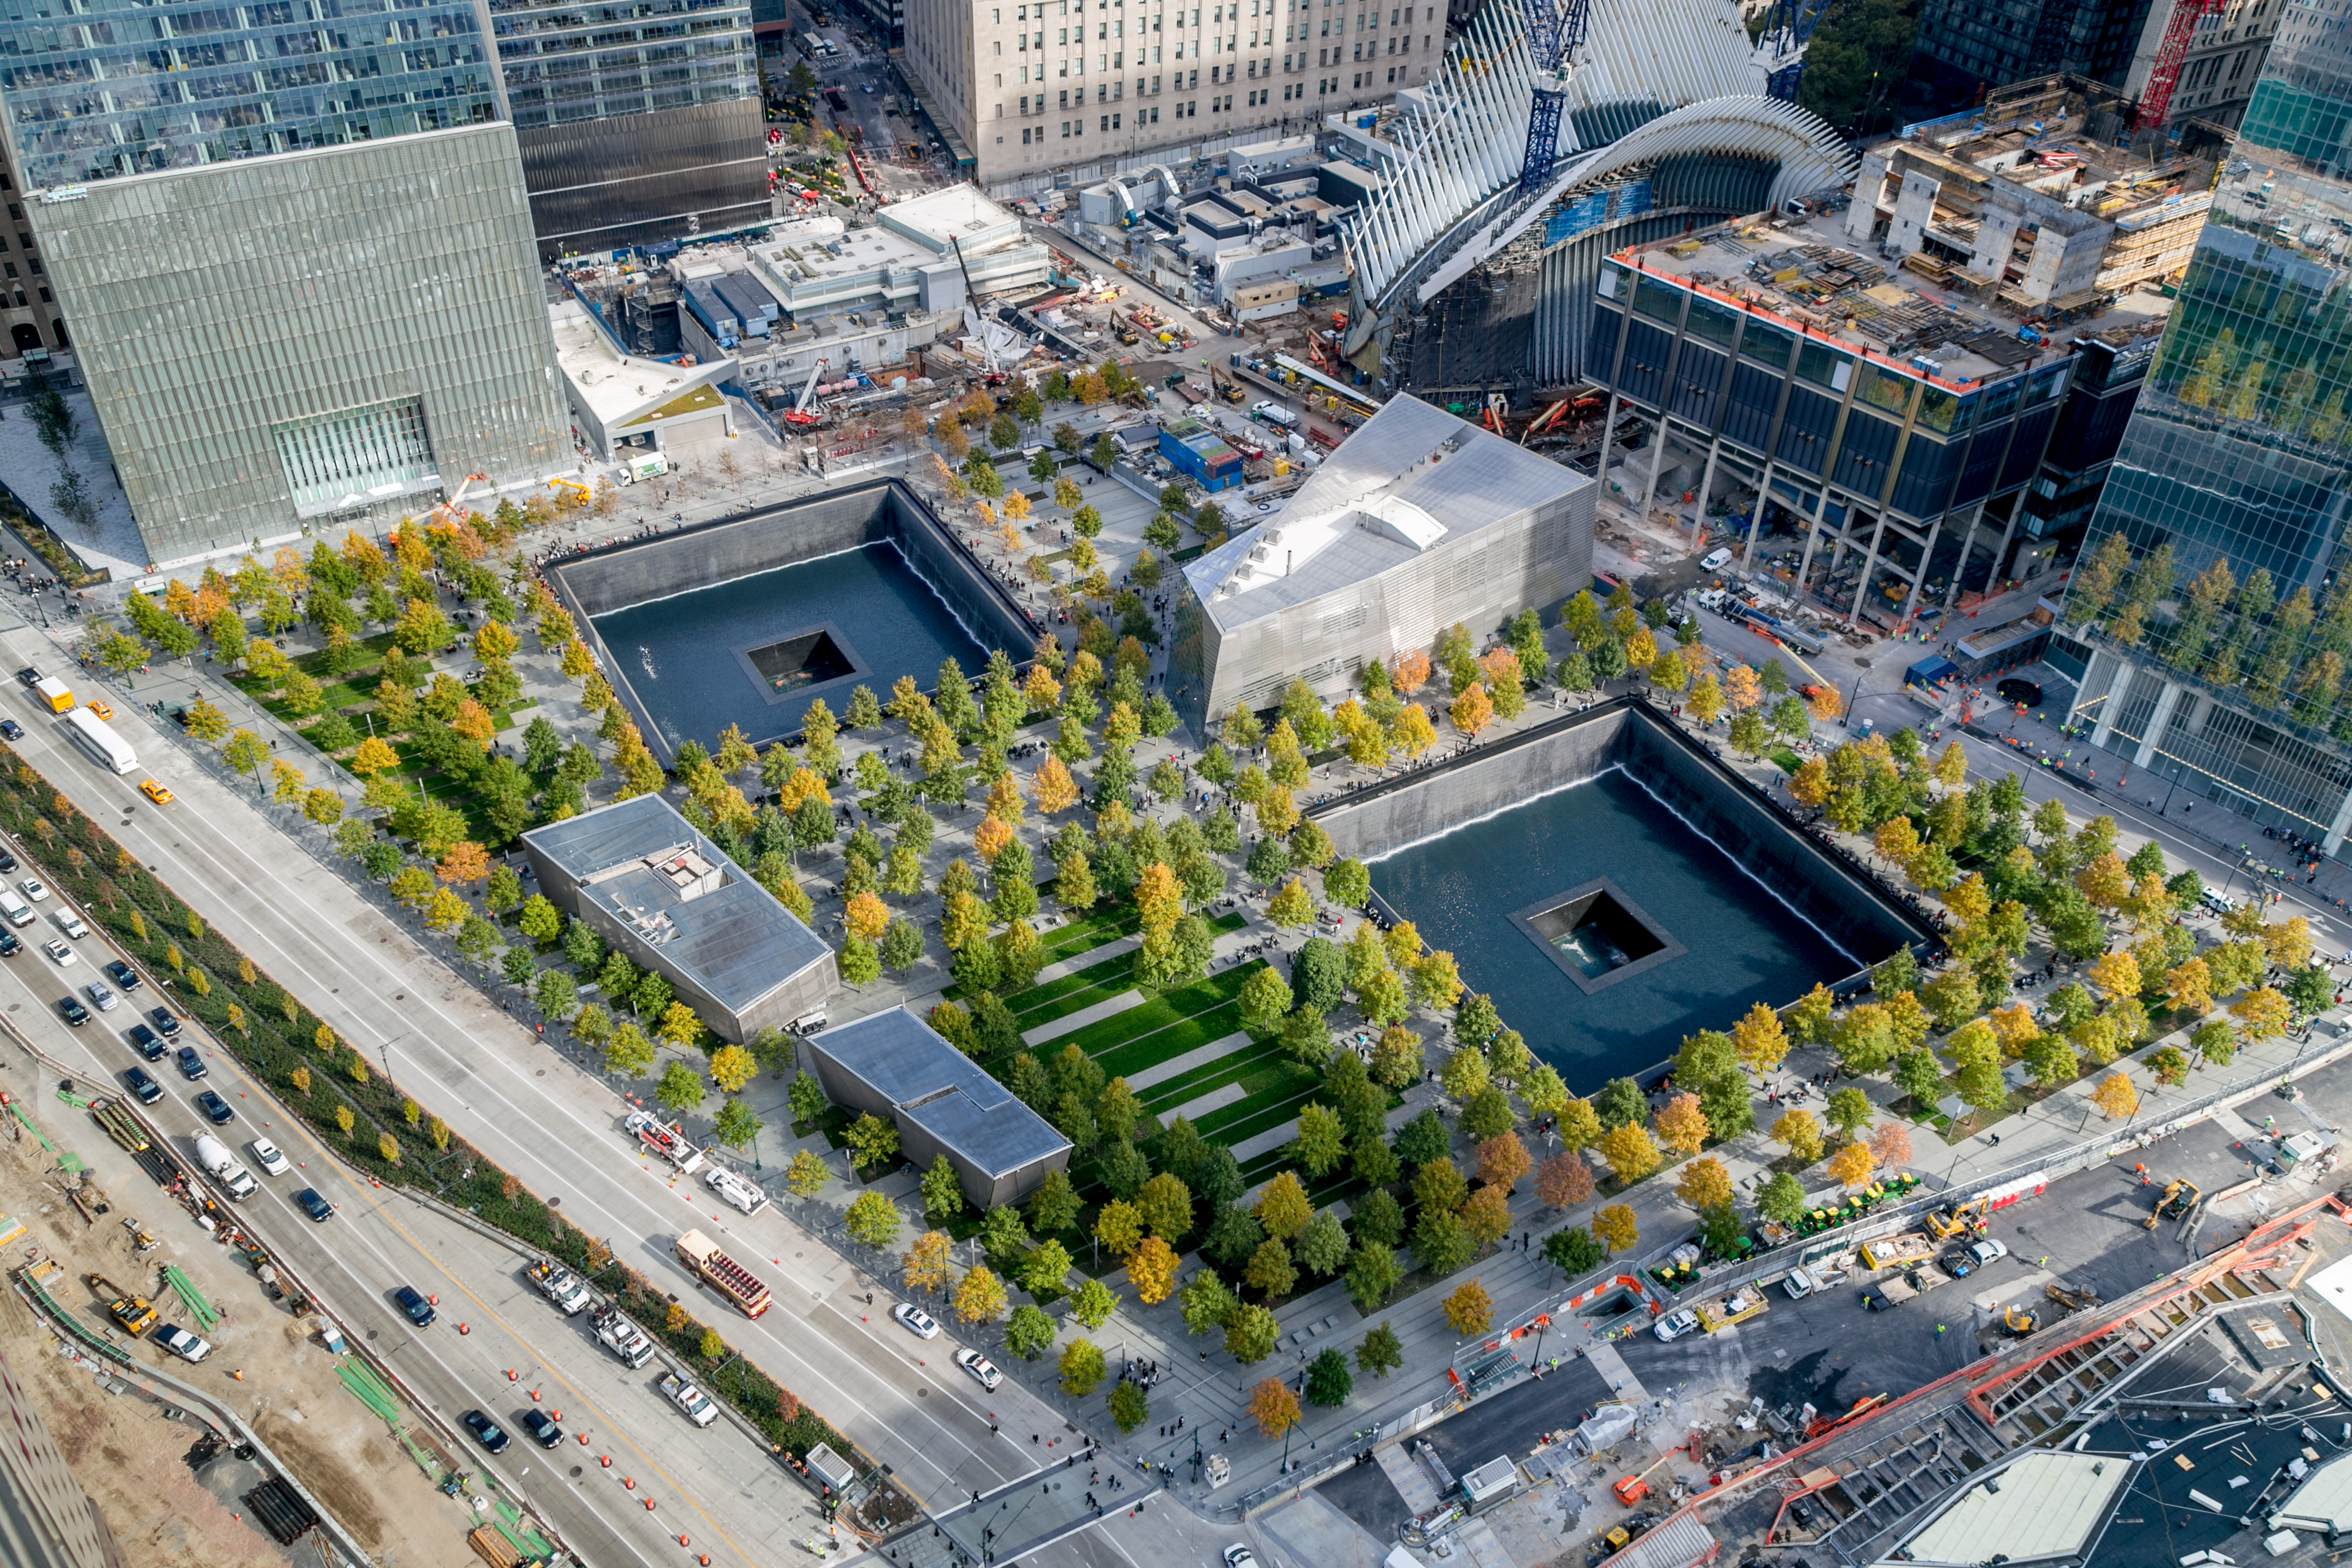 This autumn aerial of the 9/11 Memorial plaza shows the twin reflecting pools, the Museum pavilion, and the dozens of colorful swamp white oak trees that fill the plaza.